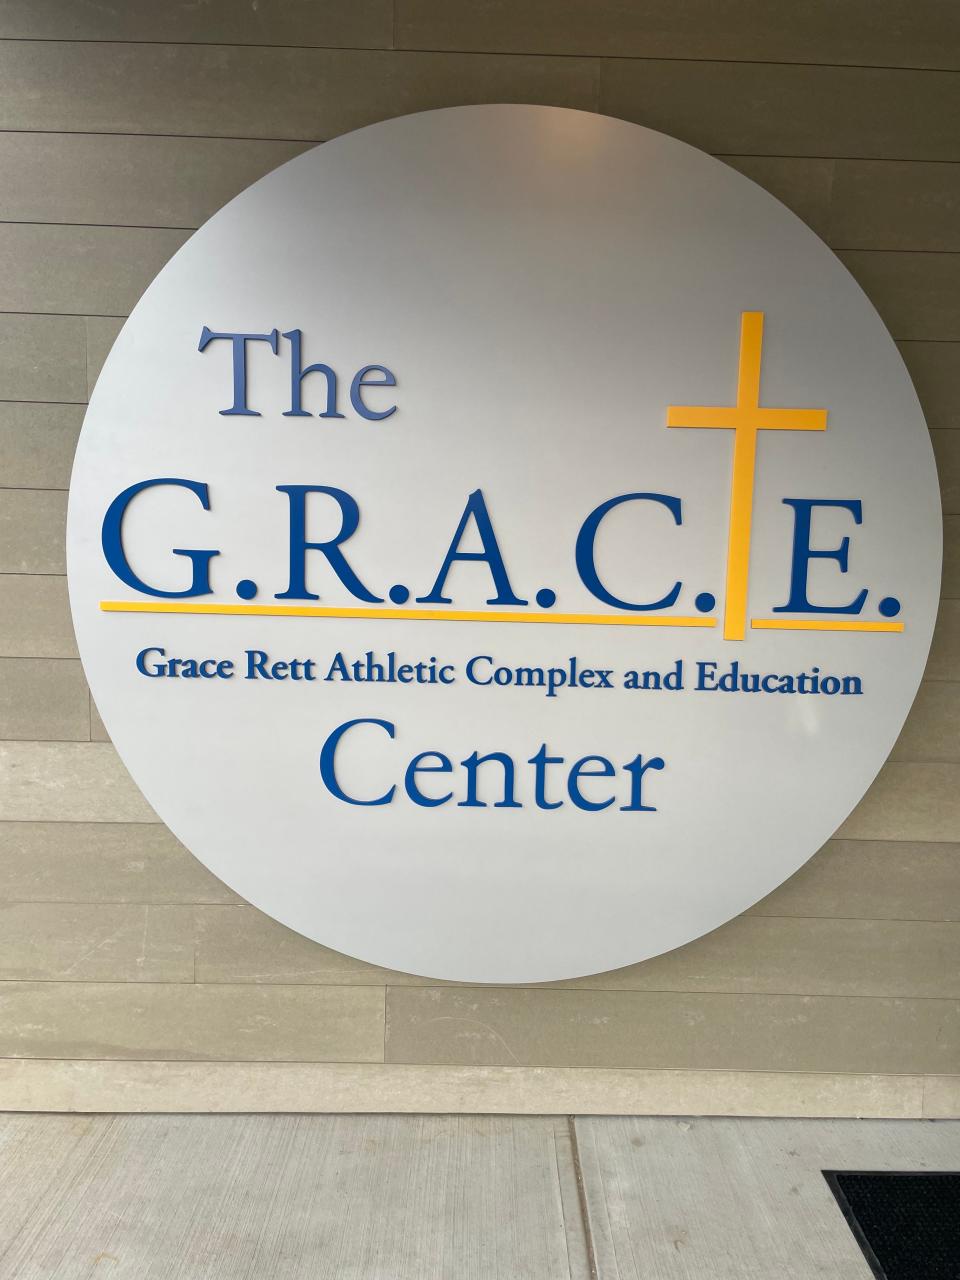 The Grace Rett Athletic Complex and Education Center, or G.R.A.C.E. Center, opened Sunday with a ribbon-cutting and blessing ceremony on the campus of Our Lady of the Valley Regional School in Uxbridge. The center is dedicated to Grace Rett, who attended OLV as a youngster and was a member of the Holy Cross women's rowing team at the time of her tragic death two years ago. It was a dream of hers that the school build a gymnasium of its own, which was made possible through fundraising by the school, the community and her HC teammates.